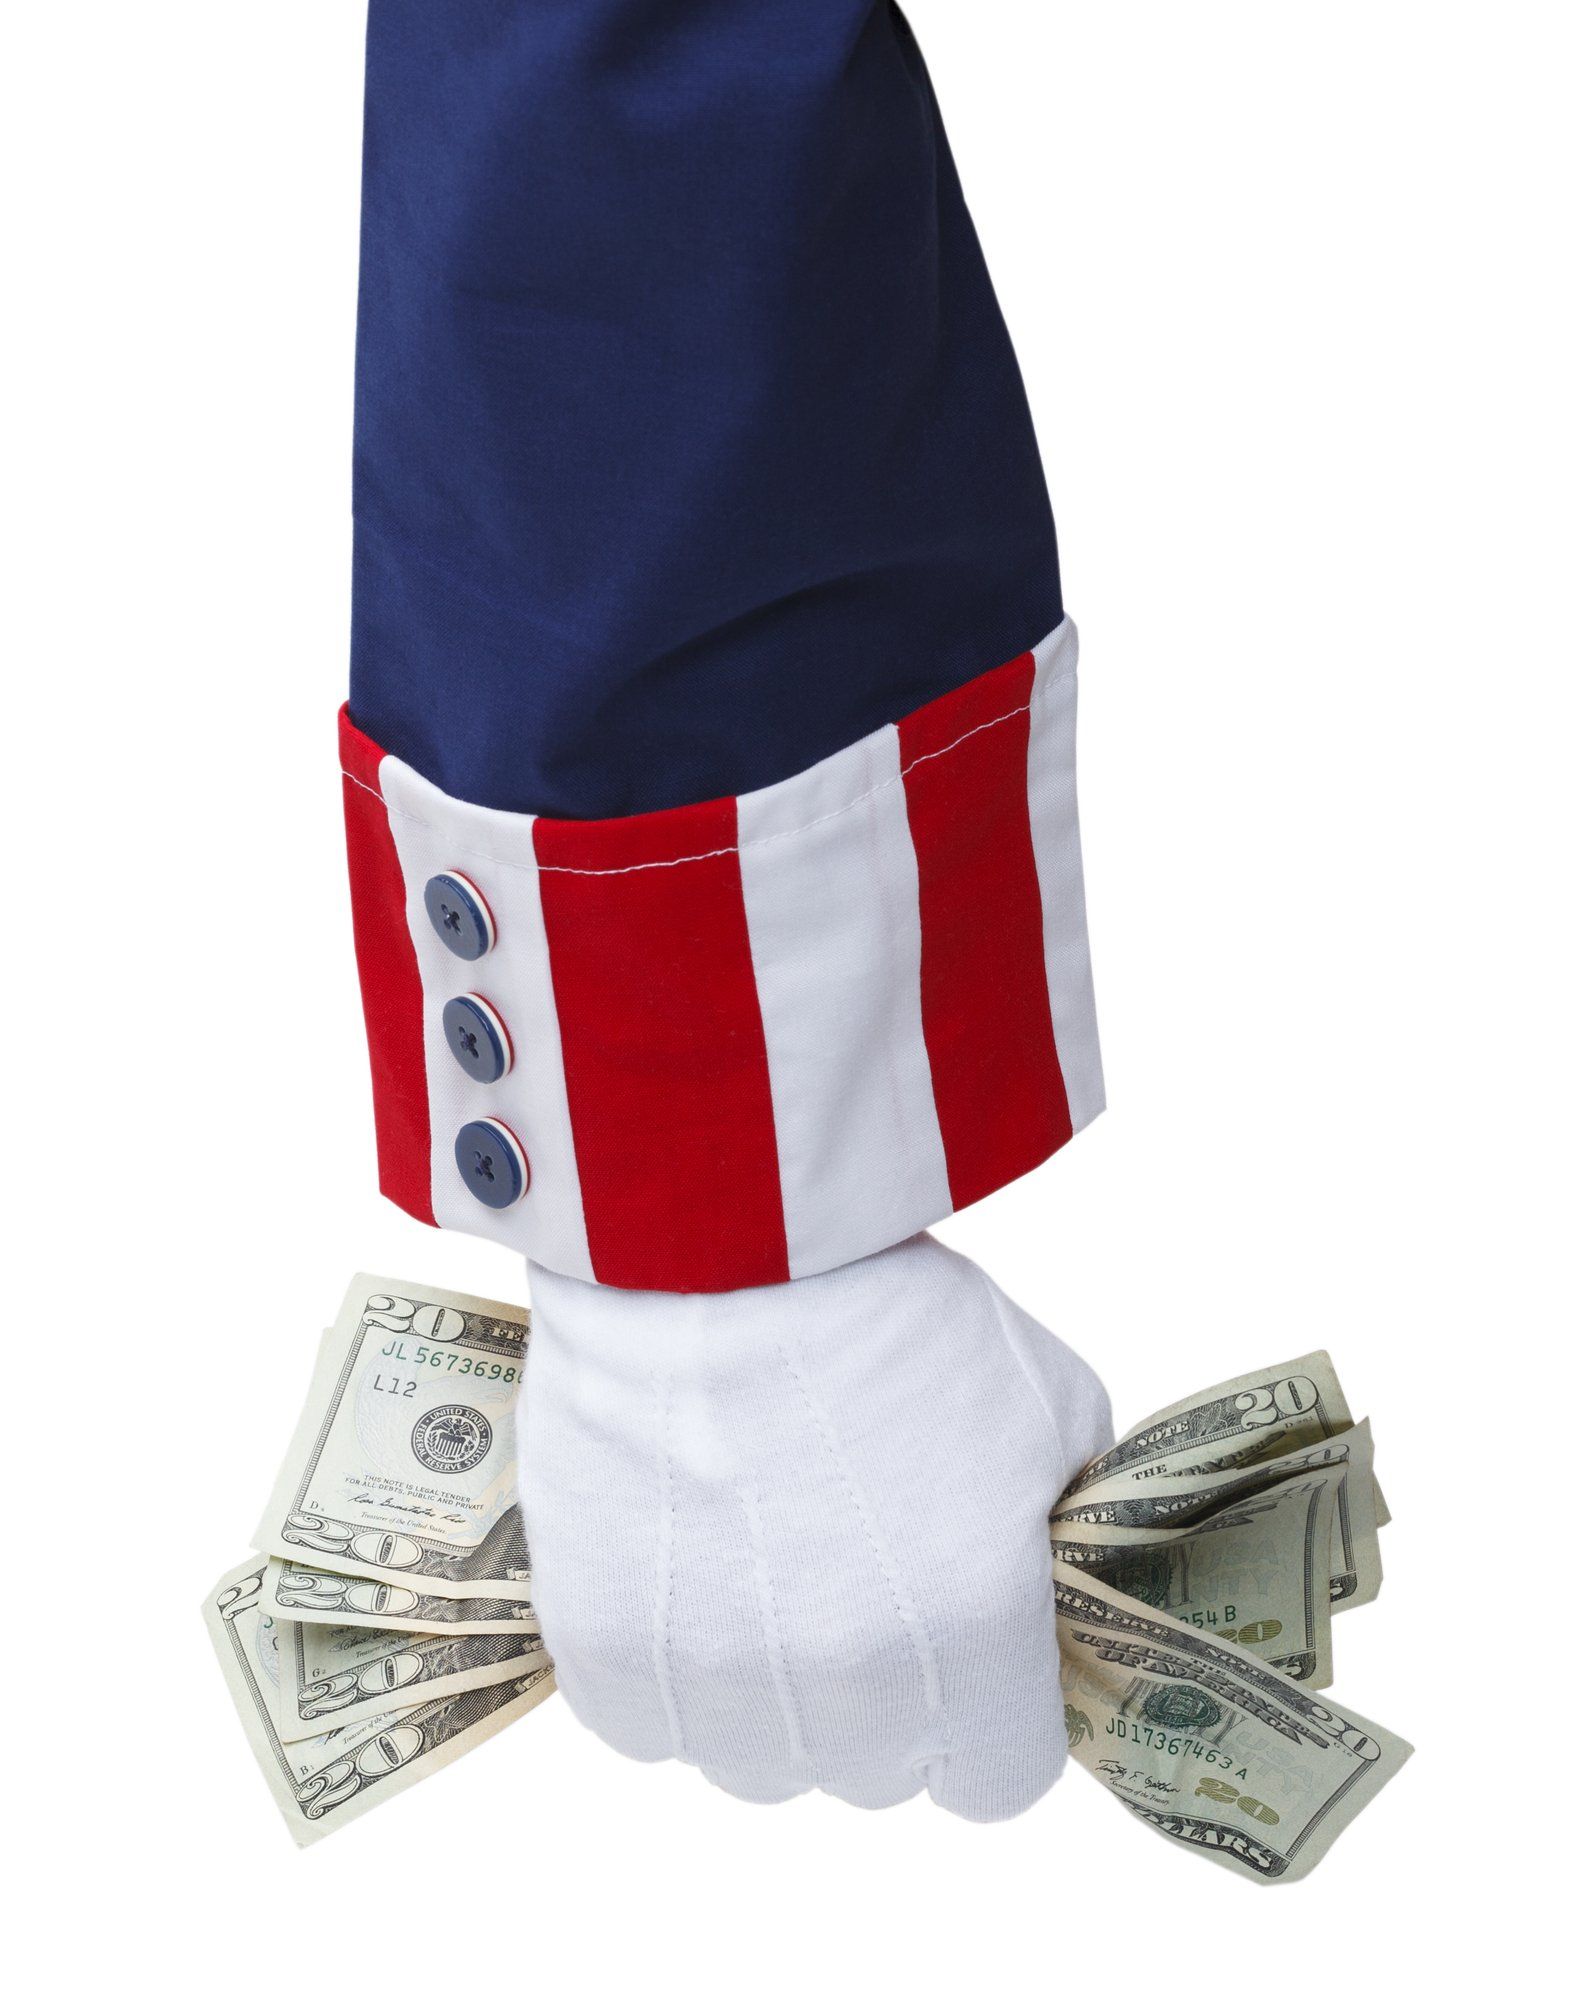 Forearm of Uncle Sam in red, white and blue suit with white glove clenching paper money